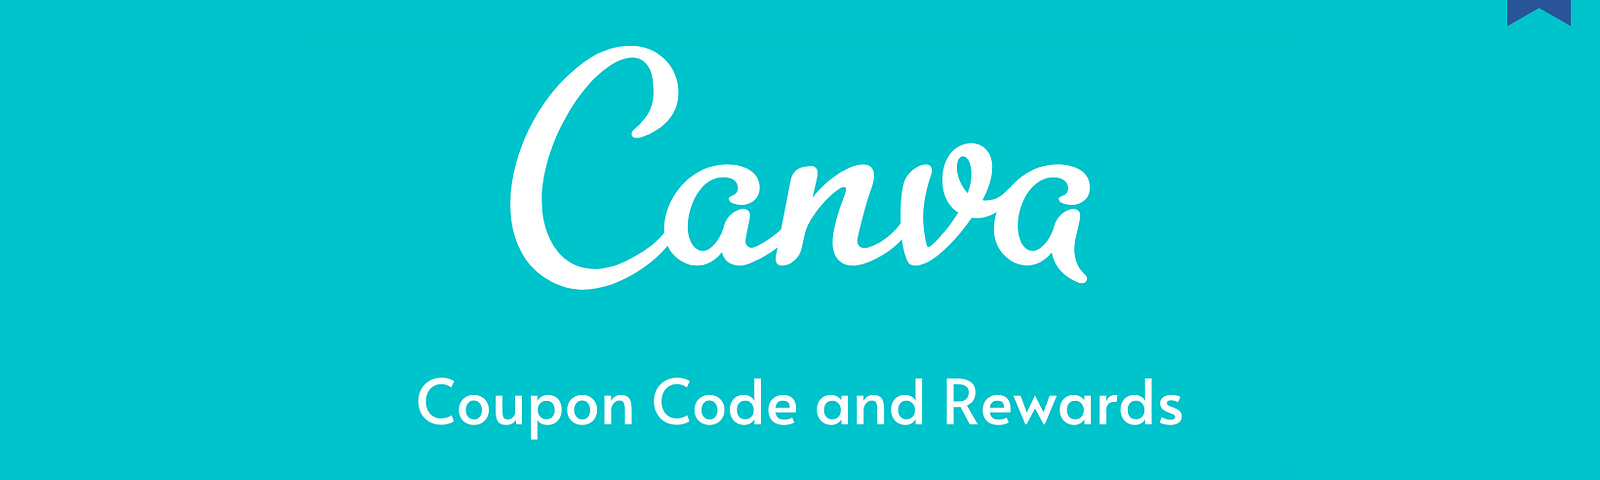 Canva Coupon Code and Referral Rewards 2020